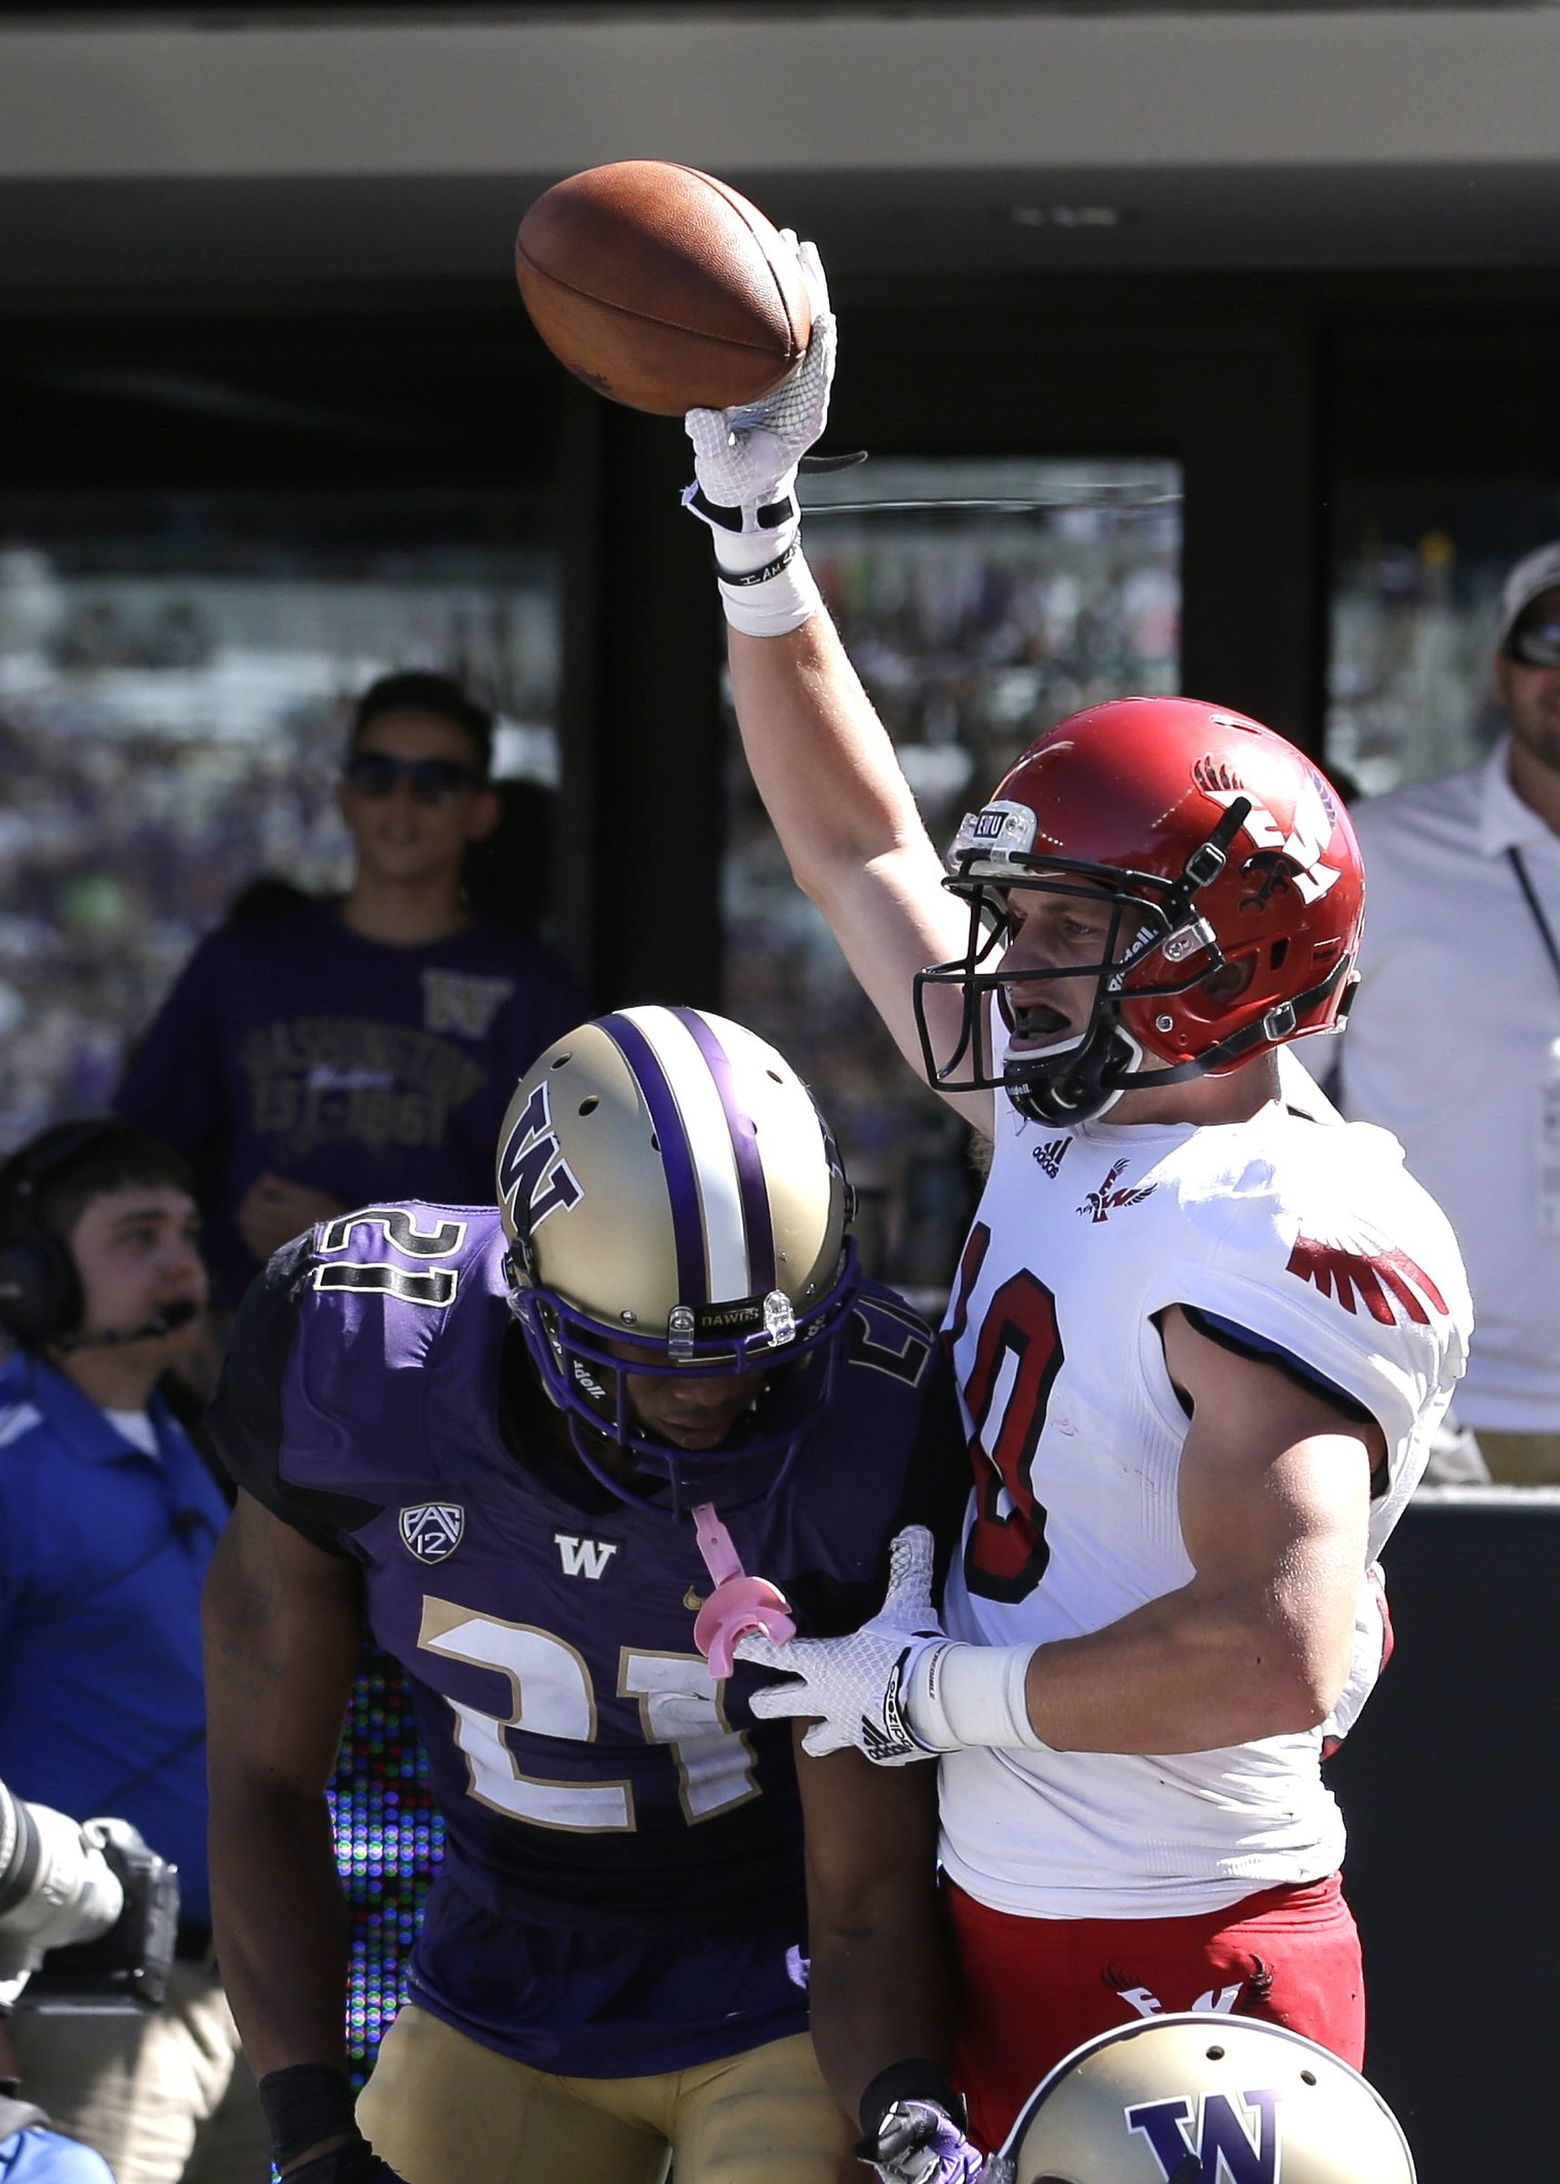 Cooper Kupp: College football career, stats, highlights, records